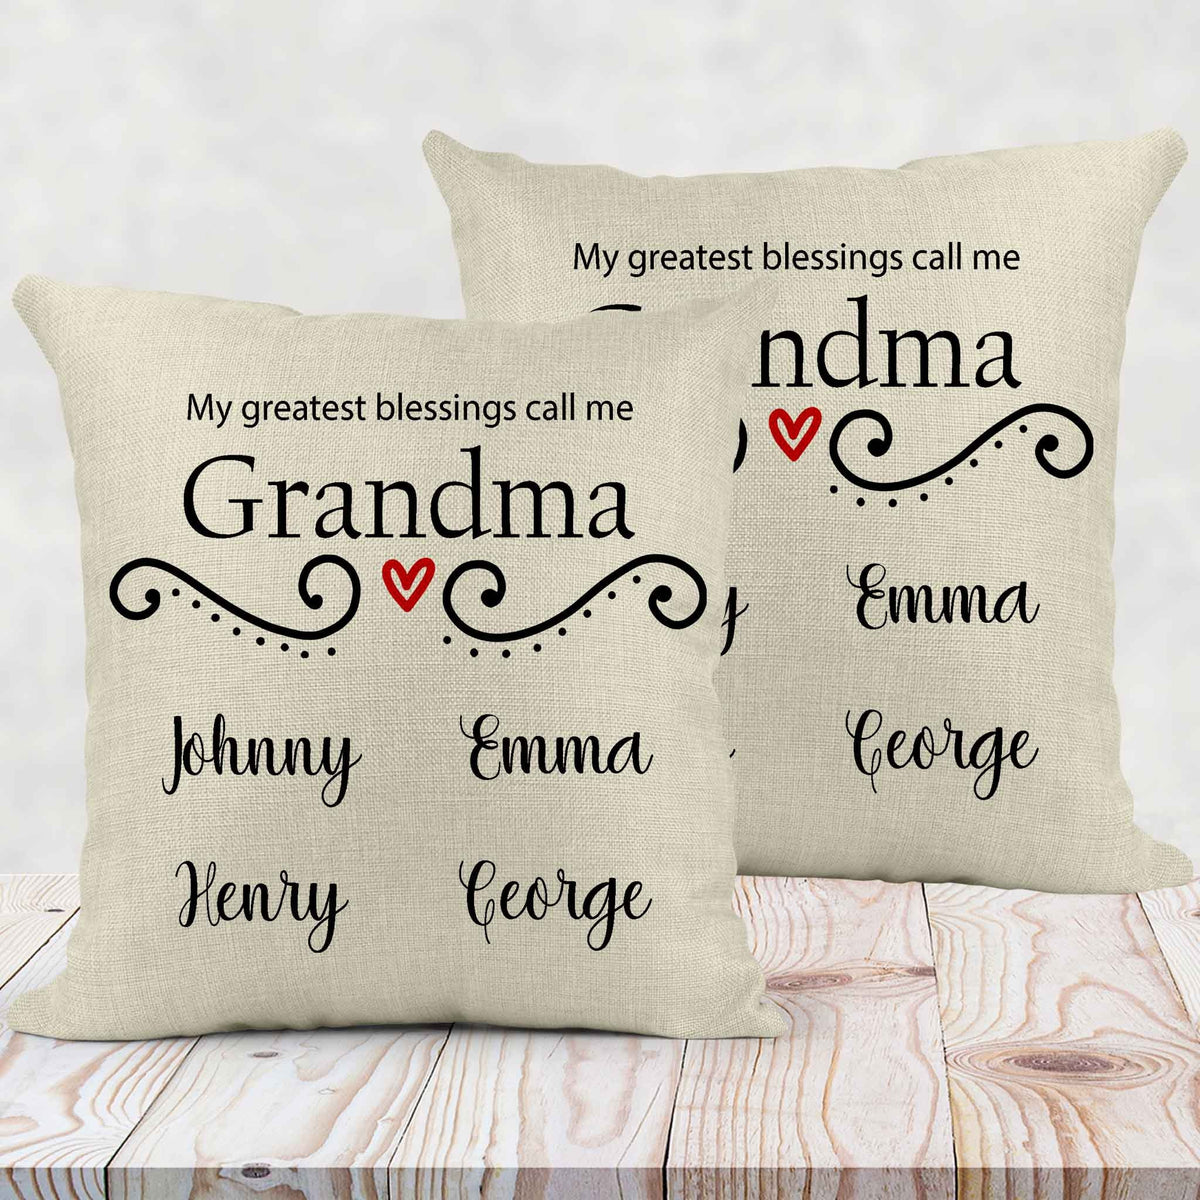 Personalized Throw Pillow | Custom Decorative Pillow | Grandma&#39;s Greatest Blessing